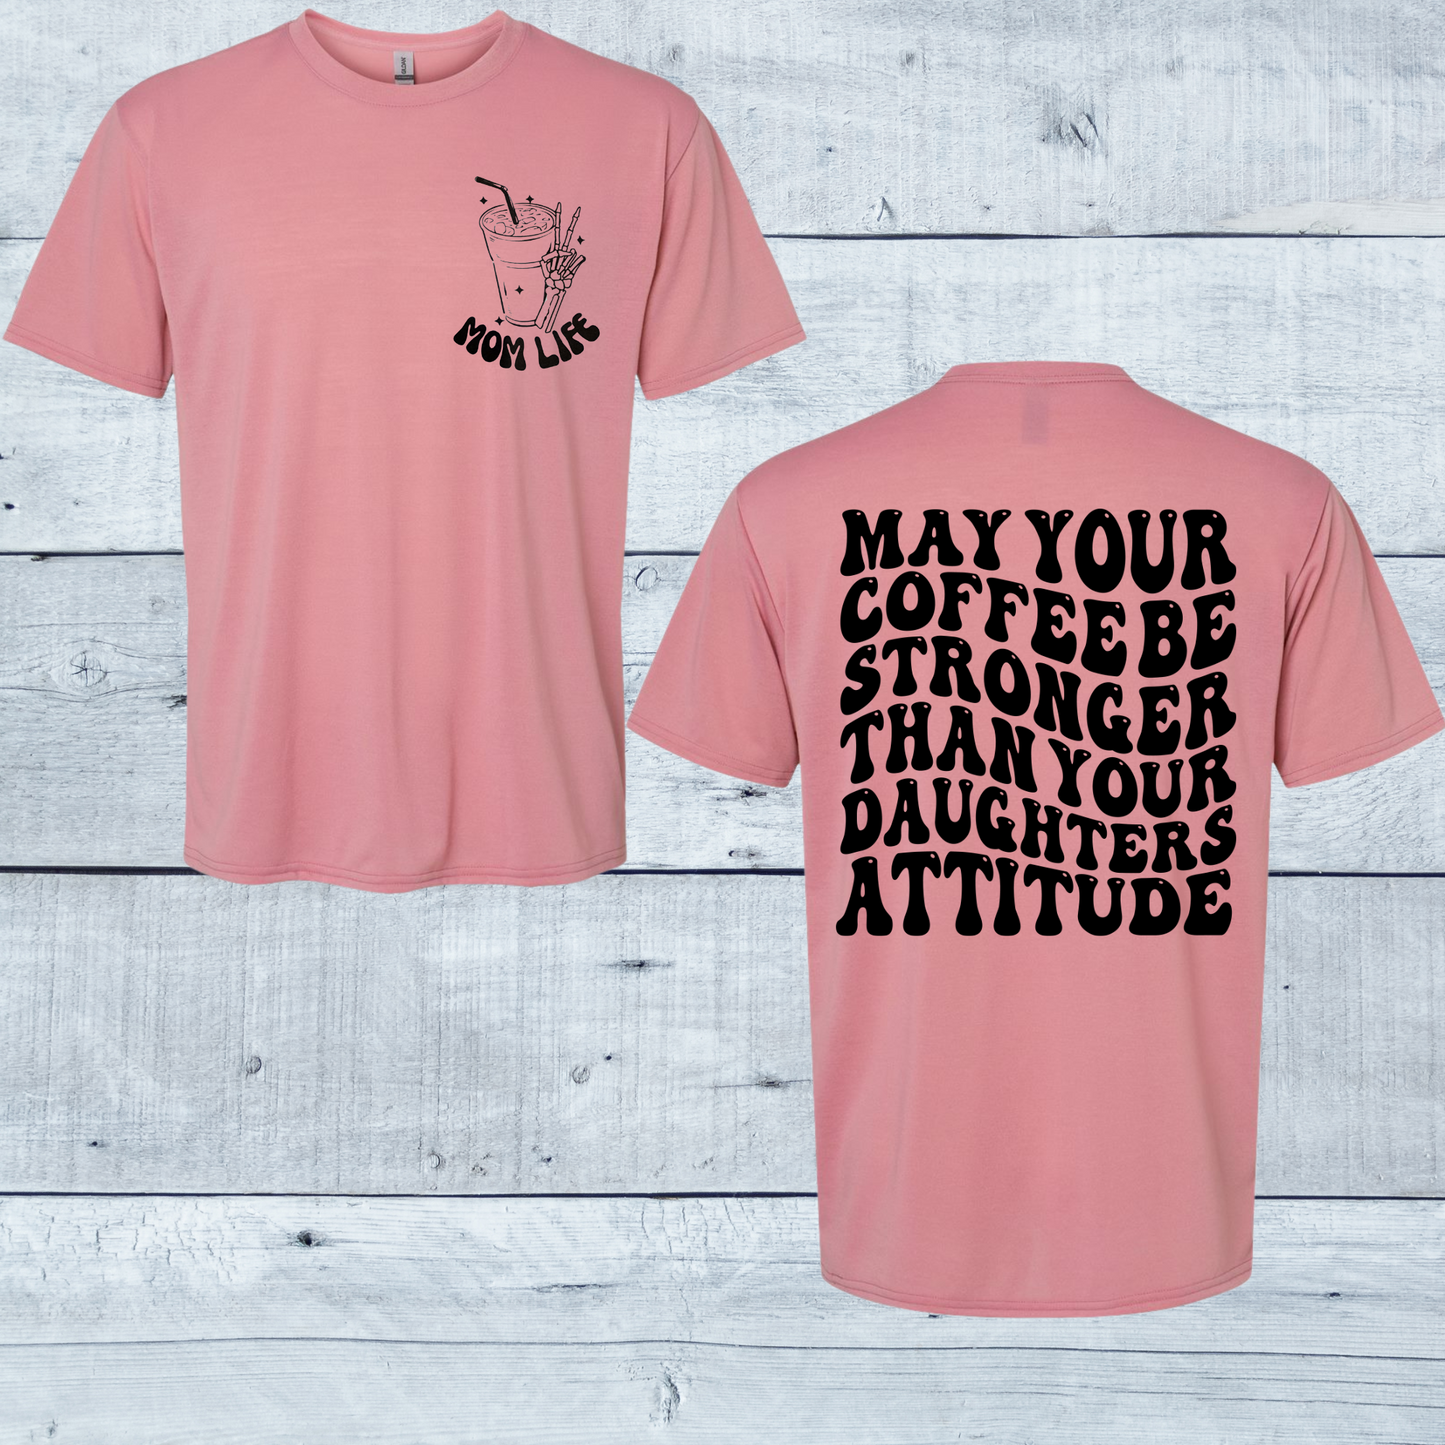 Pink Short sleeve T-shirt May your coffee be stronger than your daughter's attitude.  Front and back designs